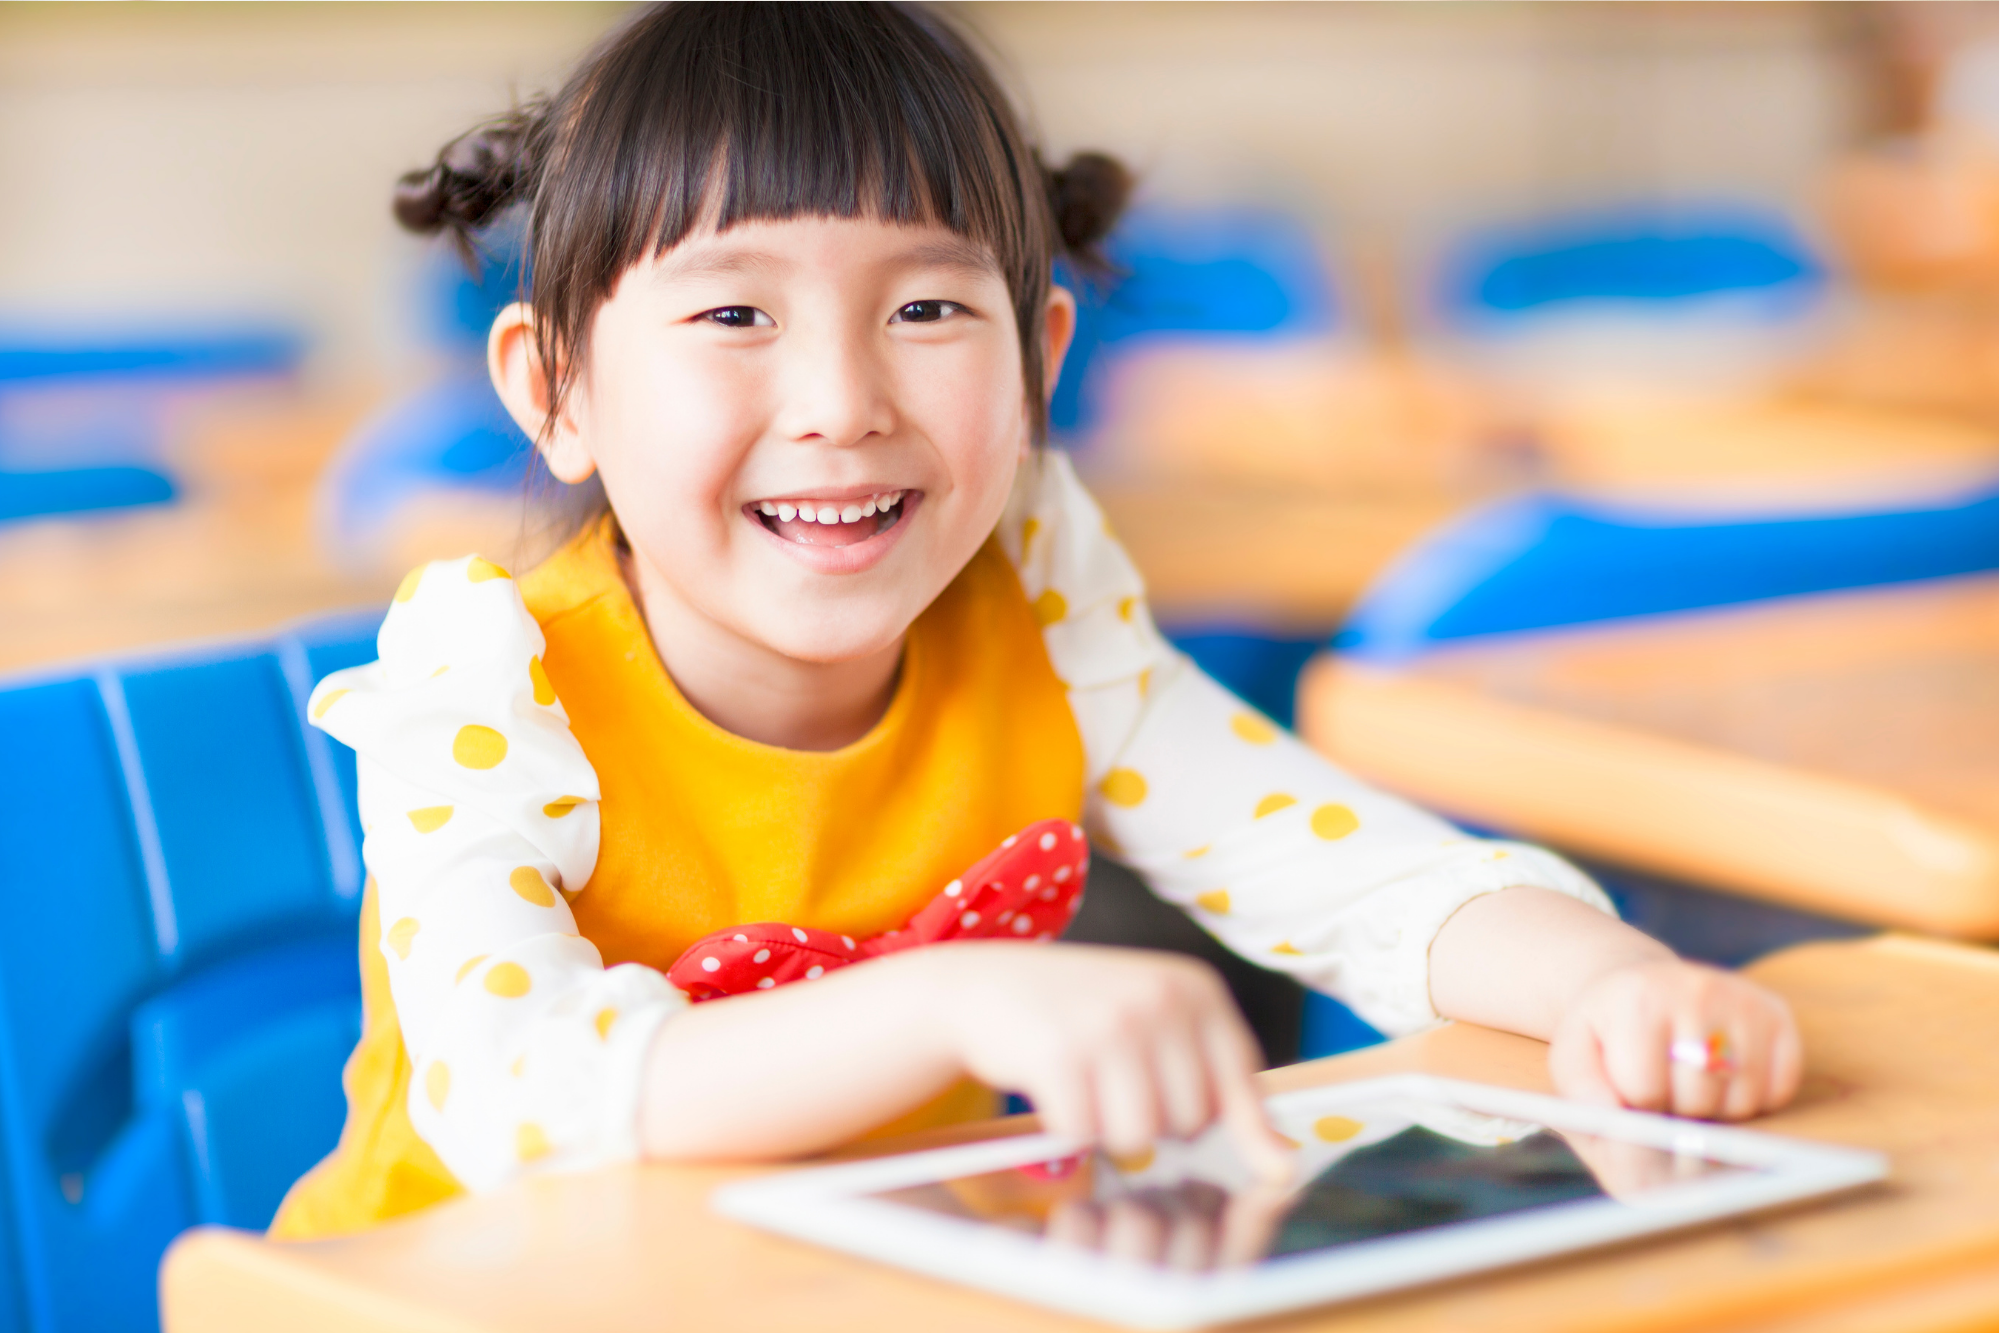 Young girl smiling at the camera with an iPad in her hands